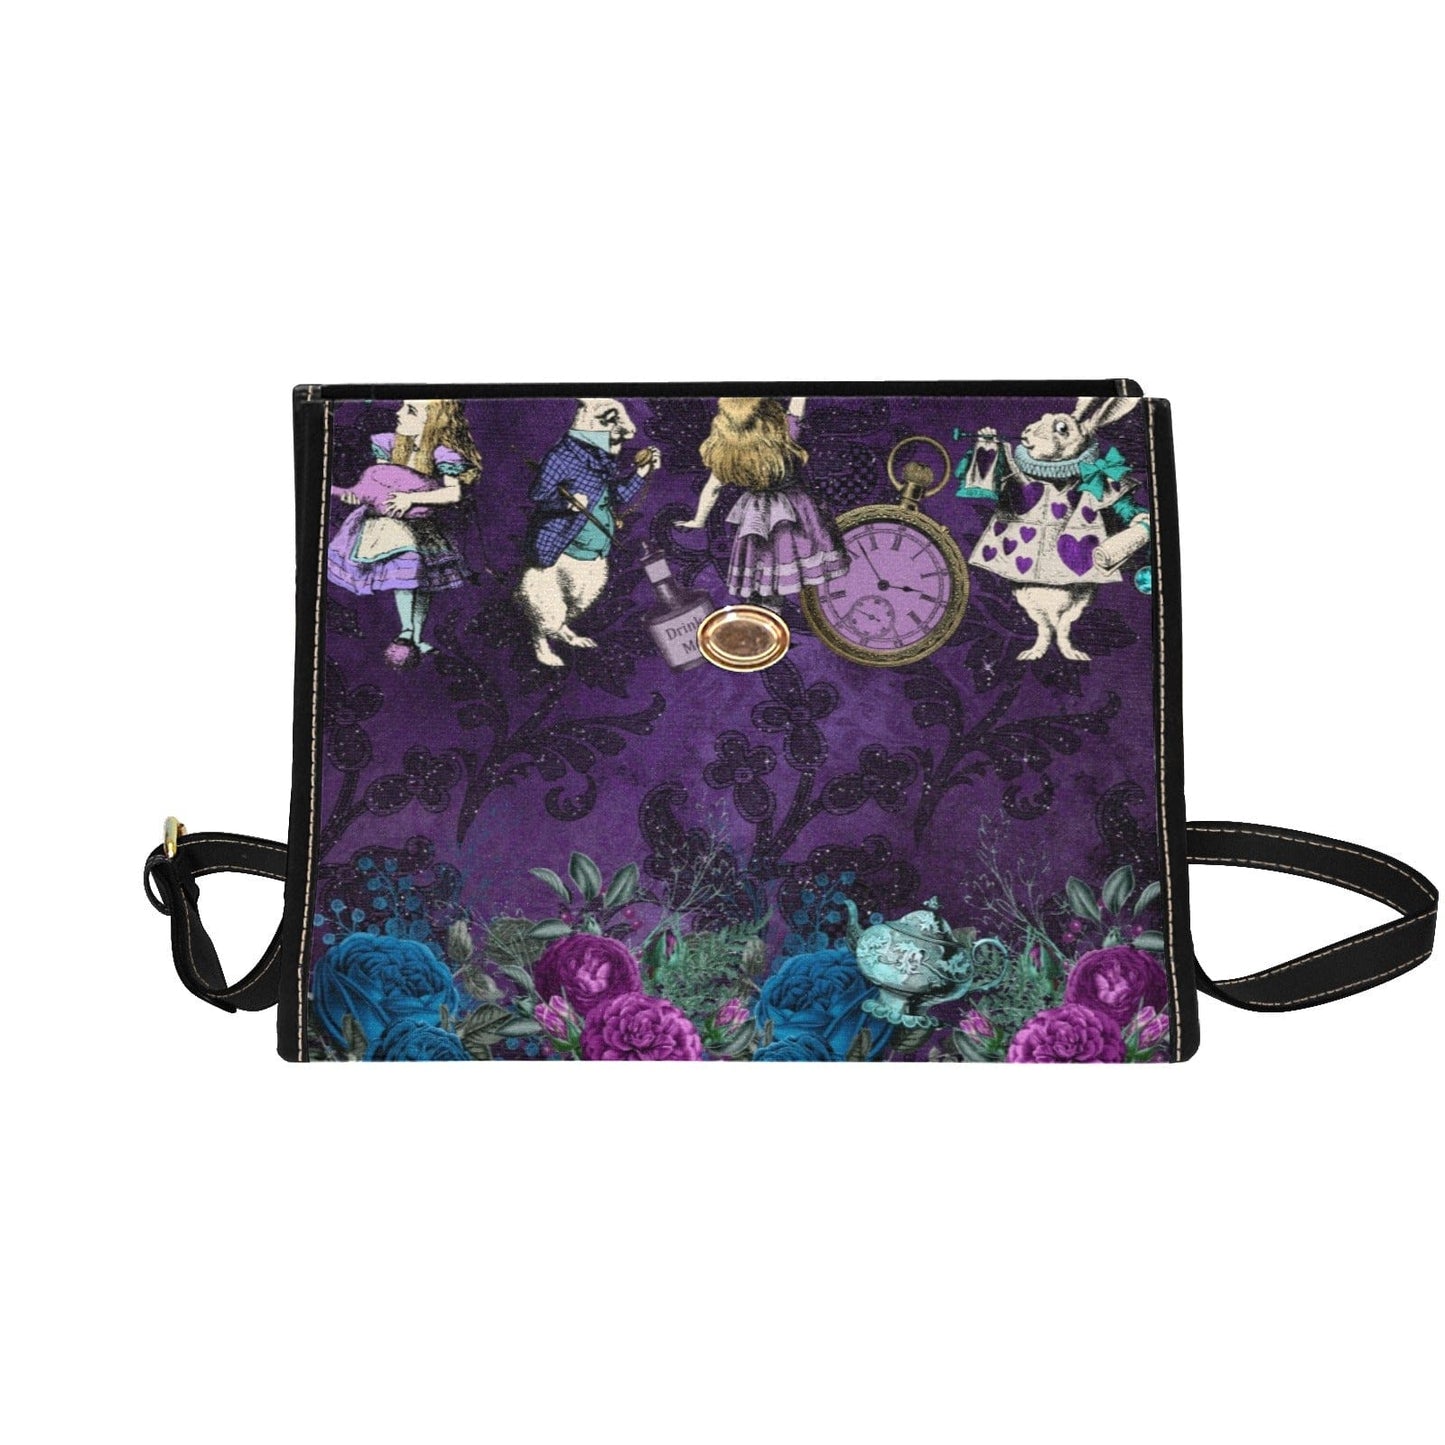 flap open revealing the front panel of the Purple damask background on an Alice in wonderland themed gothic satchel handbag featuring the White Rabbit at Gallery Serpentine